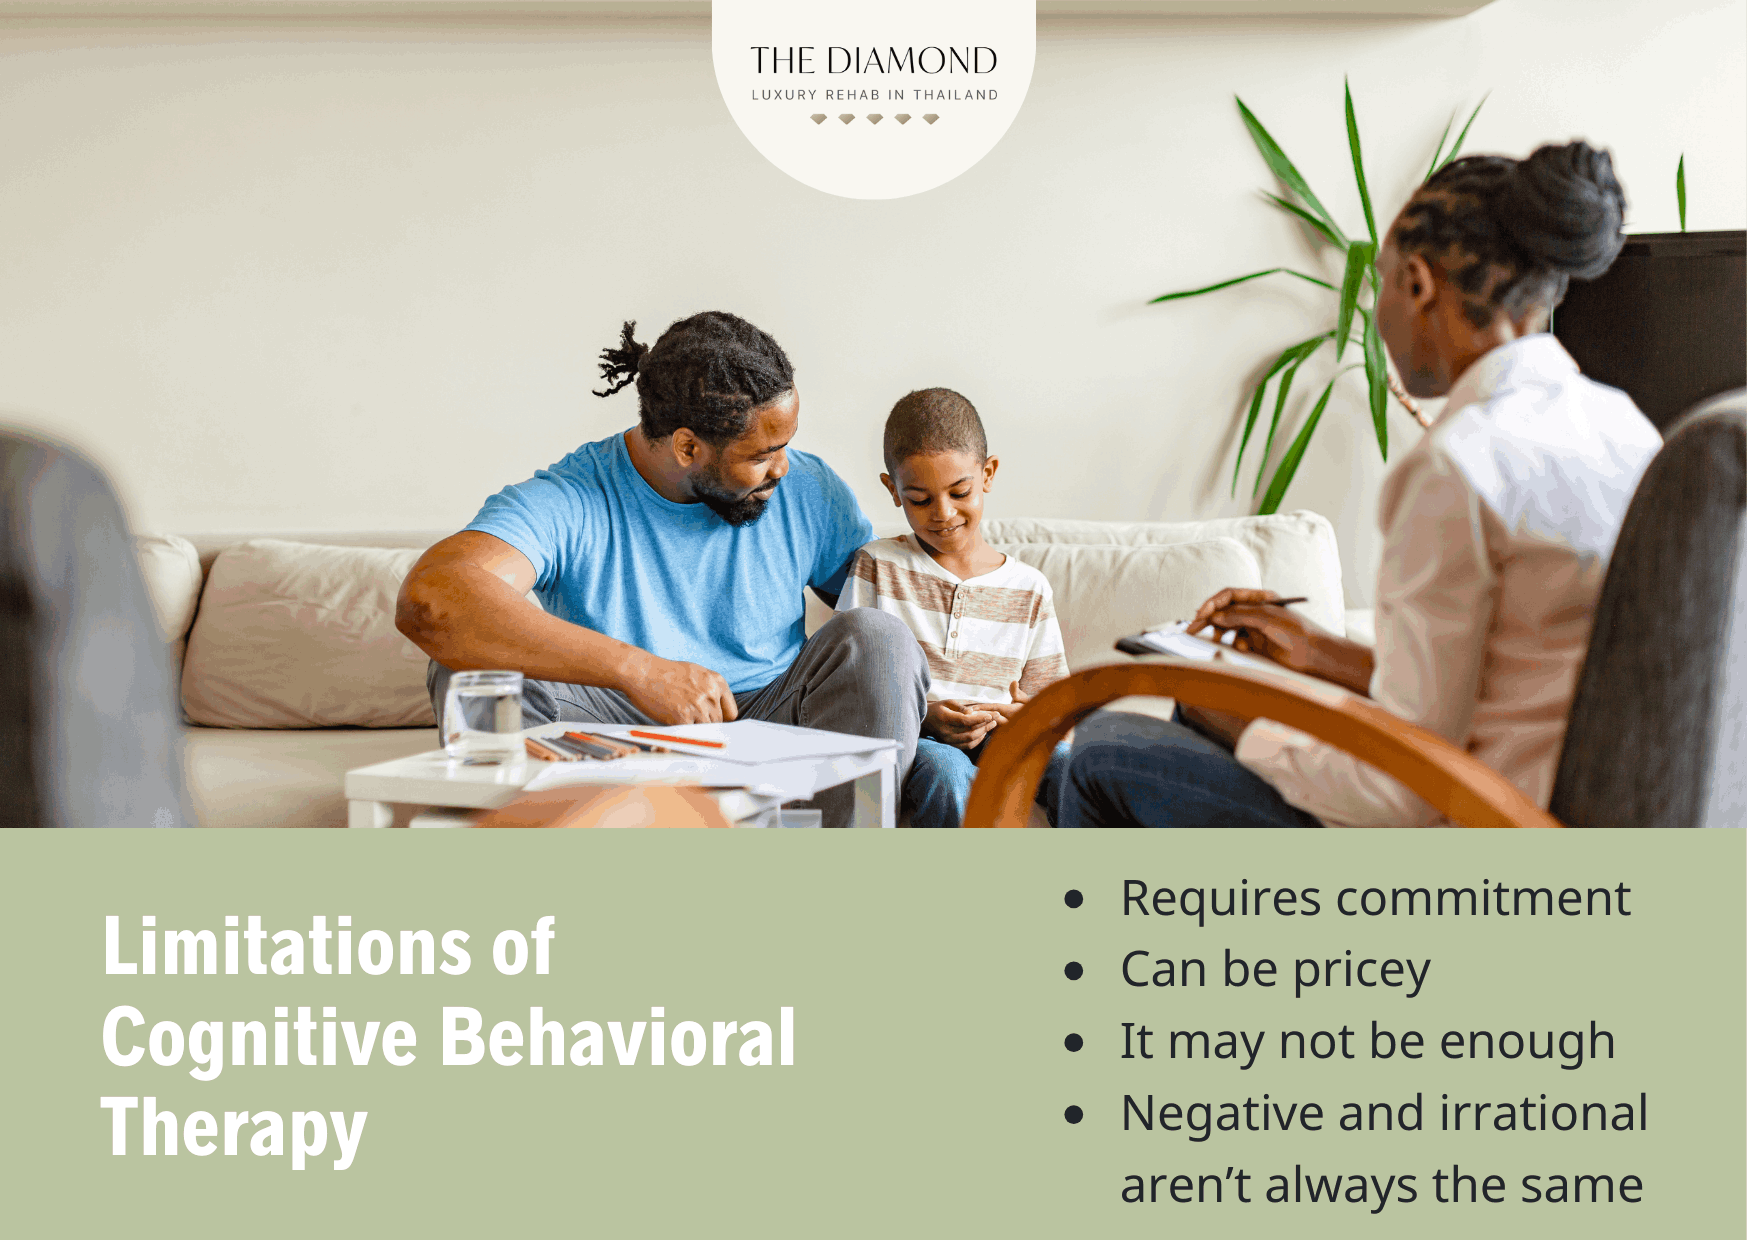 Cognitive behavioral therapy limitations